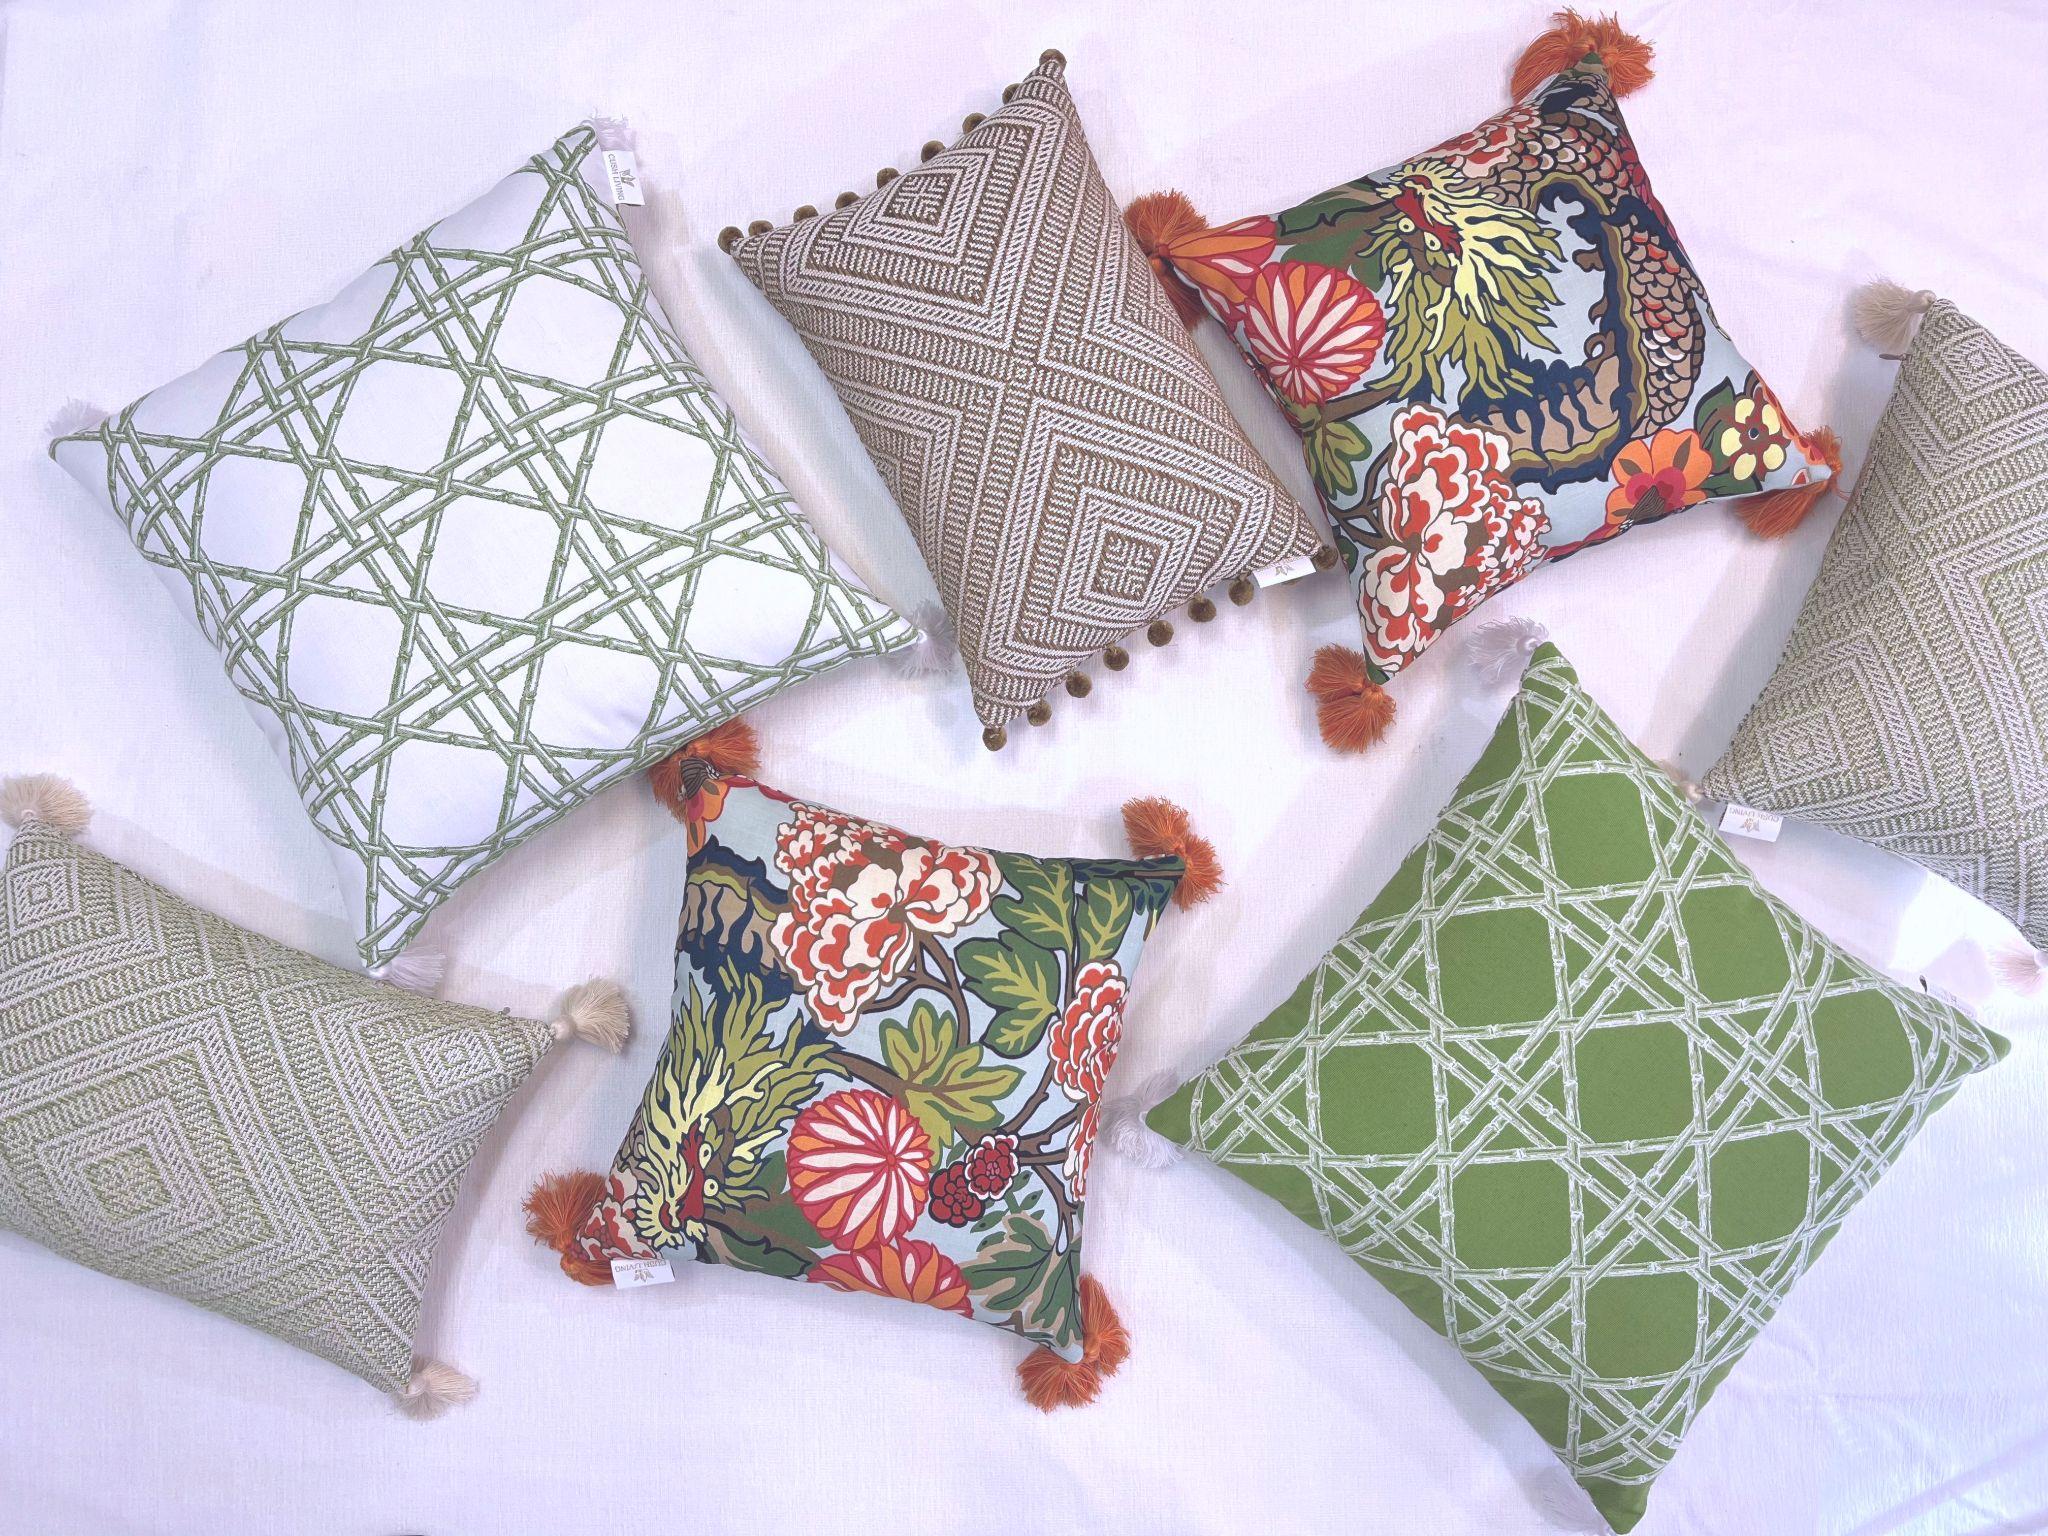 Mix and match custom pillows created by Cush Living